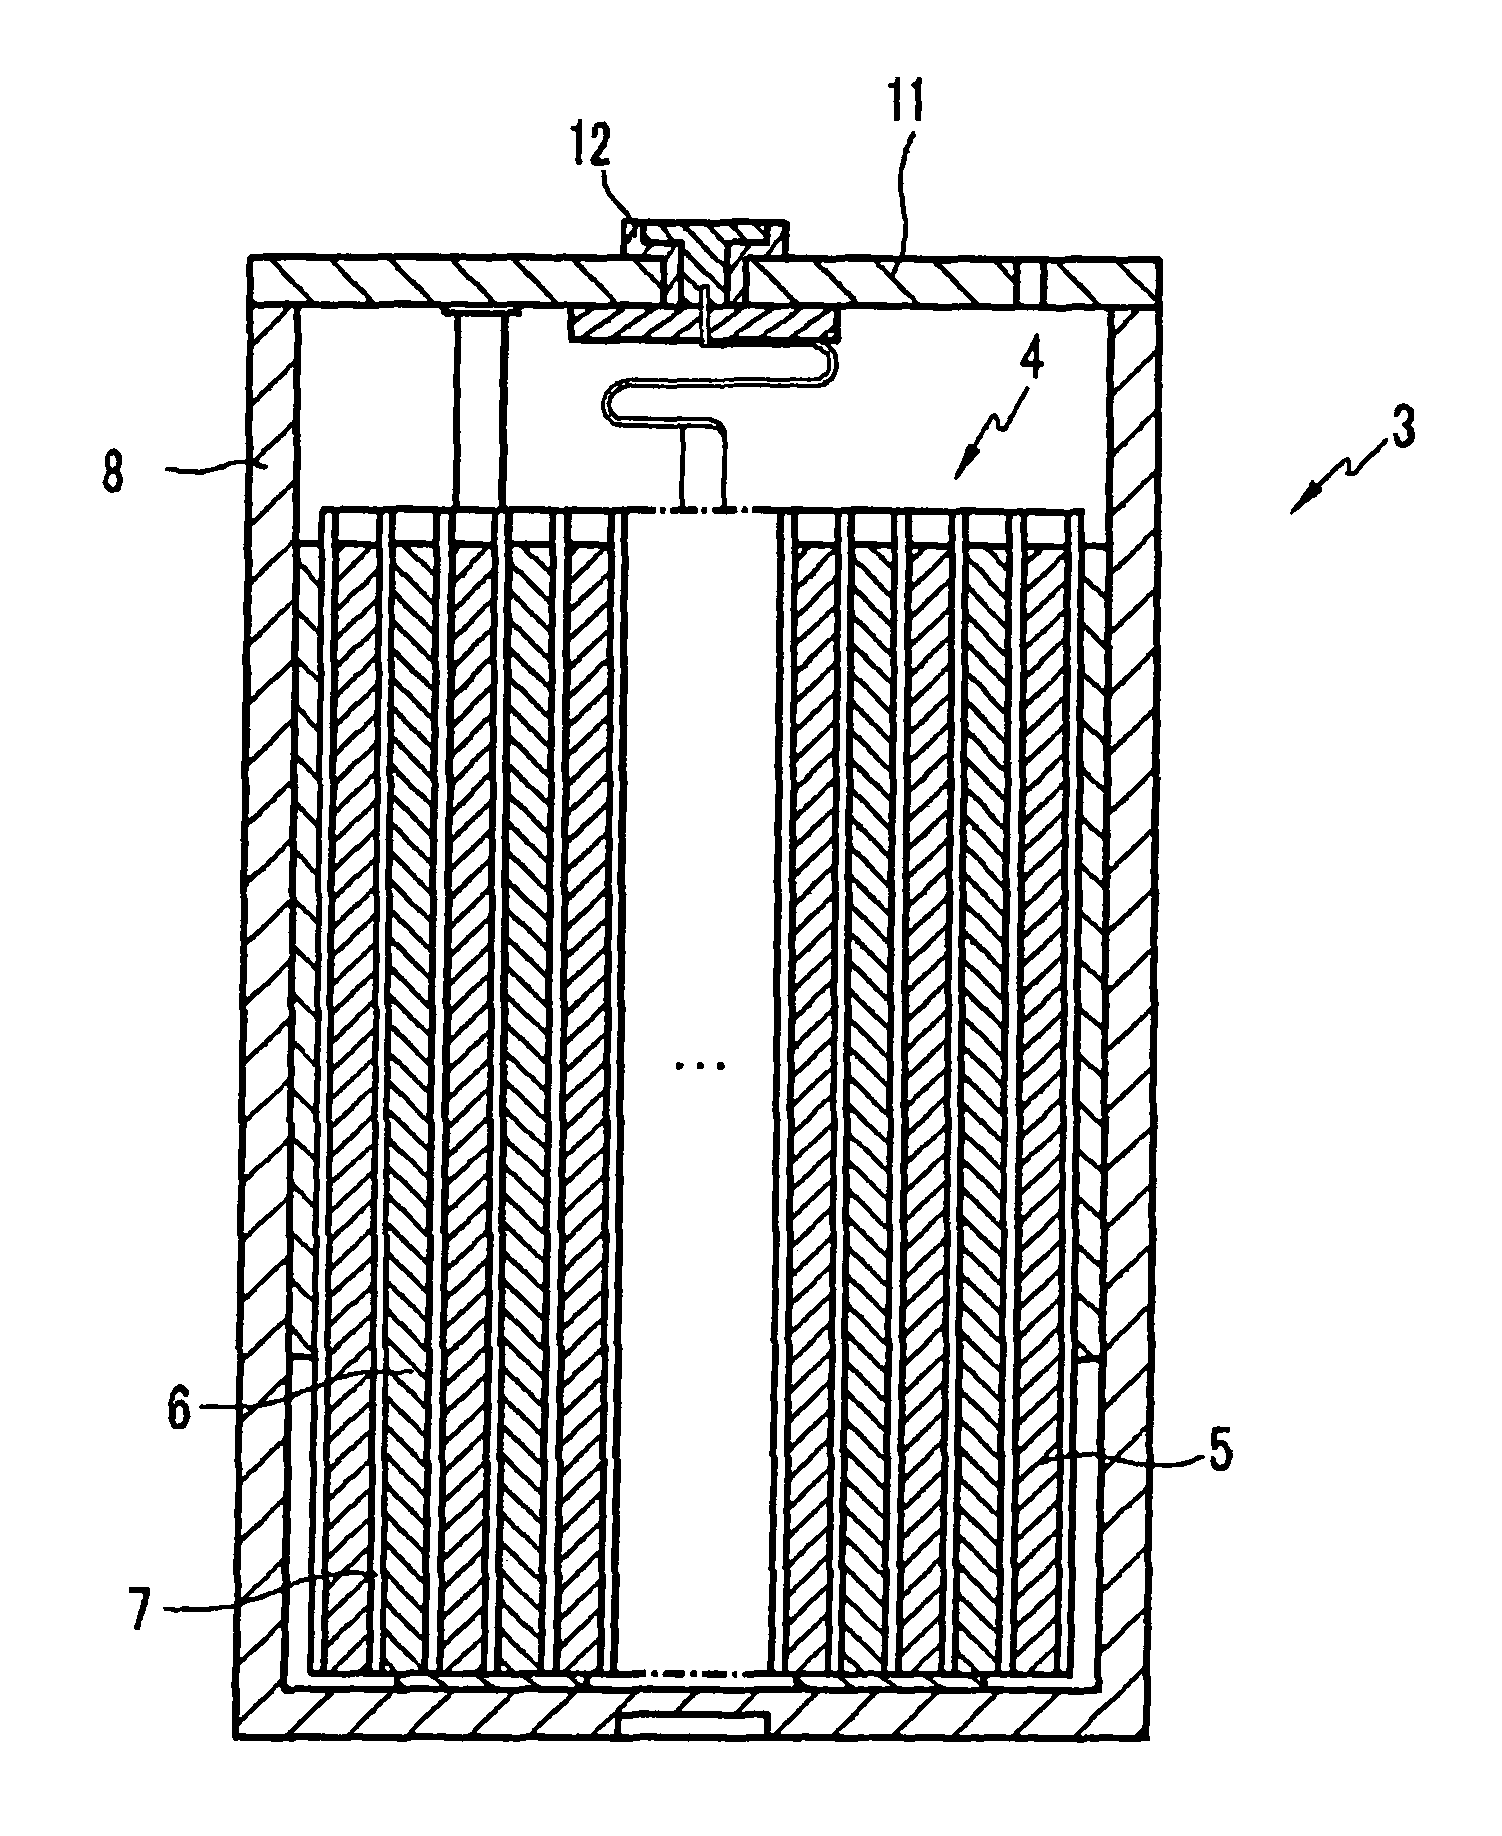 Conductive agent-positive active material composite for lithium secondary battery, method of preparing the same, and positive electrode and lithium secondary battery comprising the same